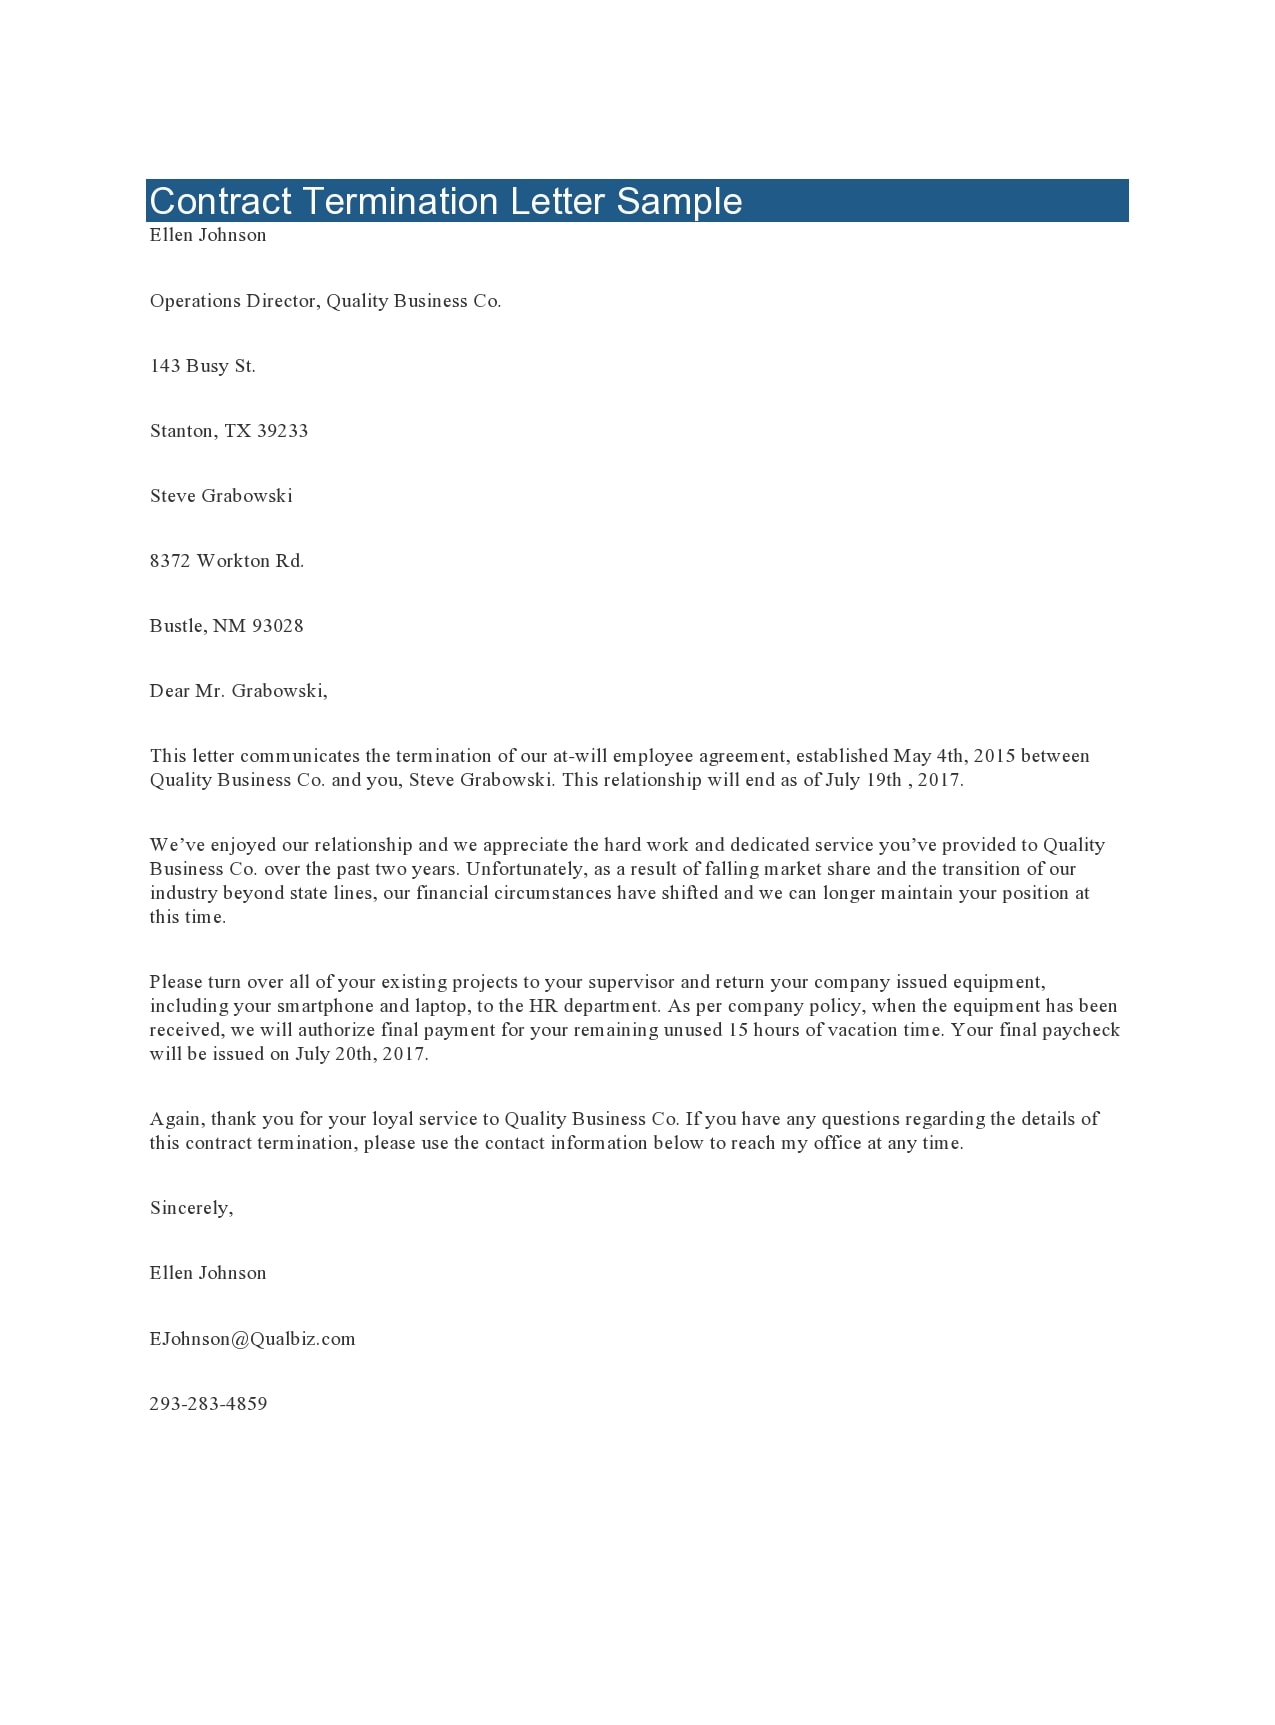 Cancellation Of Services Letter From Business from templatearchive.com